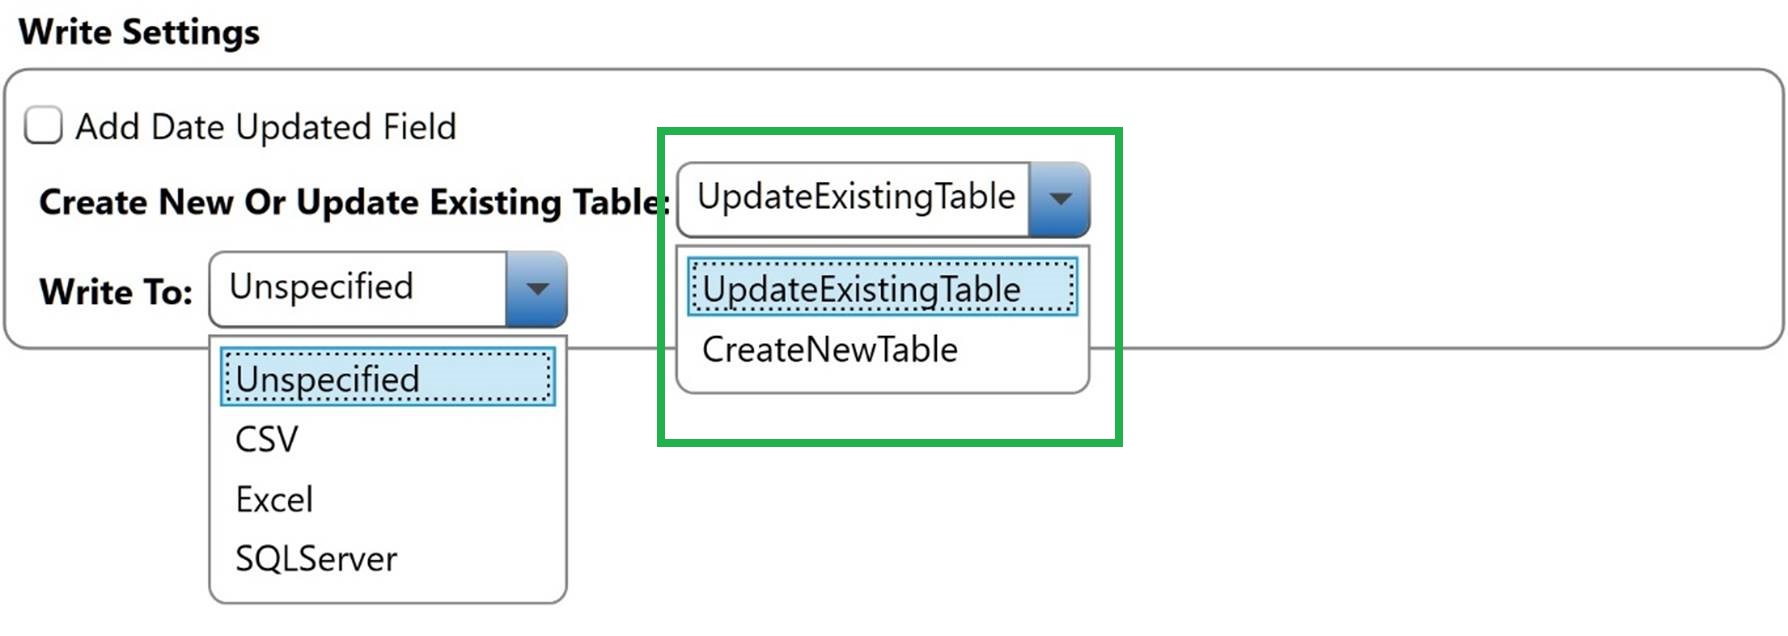 ScrapeMap Write Settings with Create New or Update Existing Table and Write To drop downs displayed